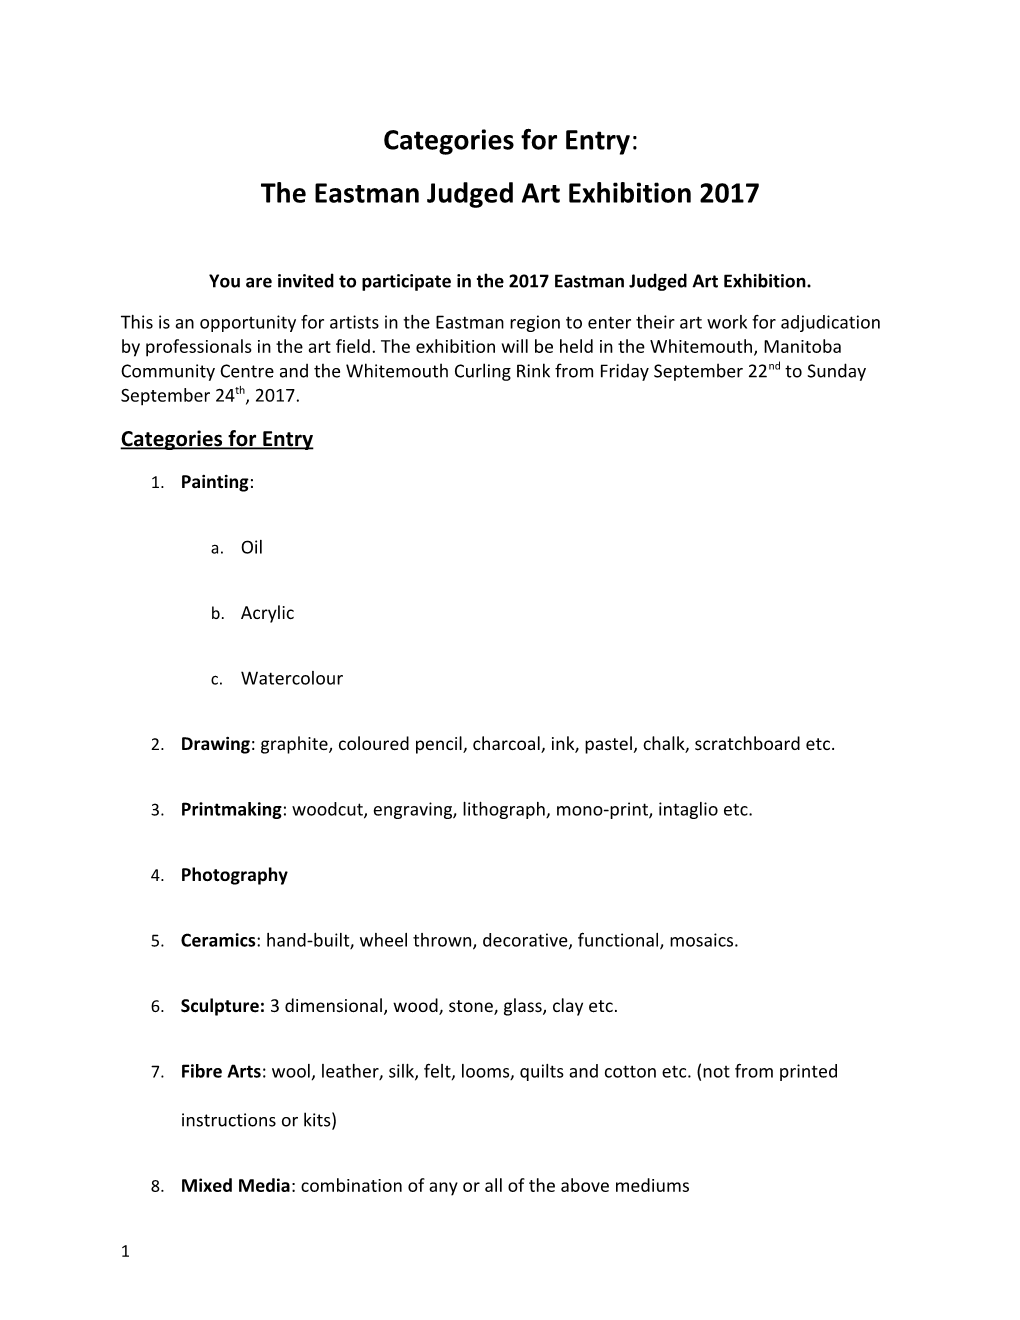 The Eastman Judged Art Exhibition 2017